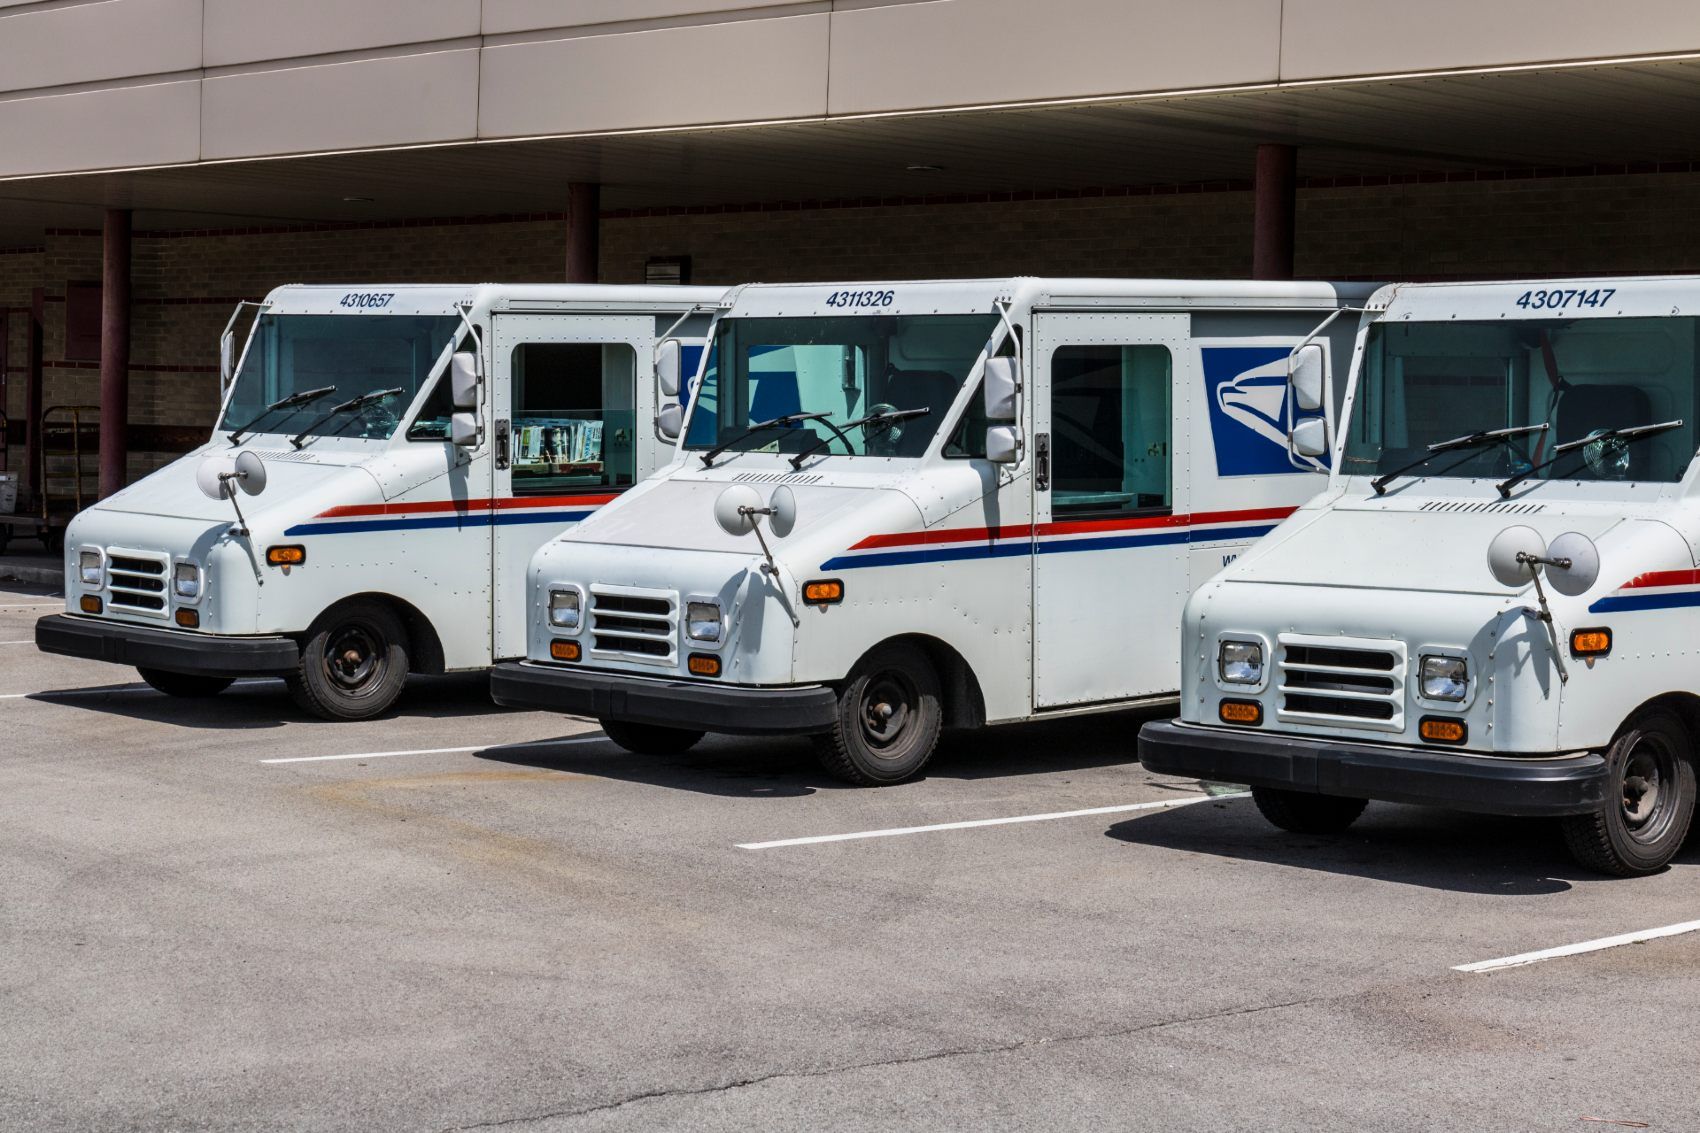 USPS vehicles parked at post office - election